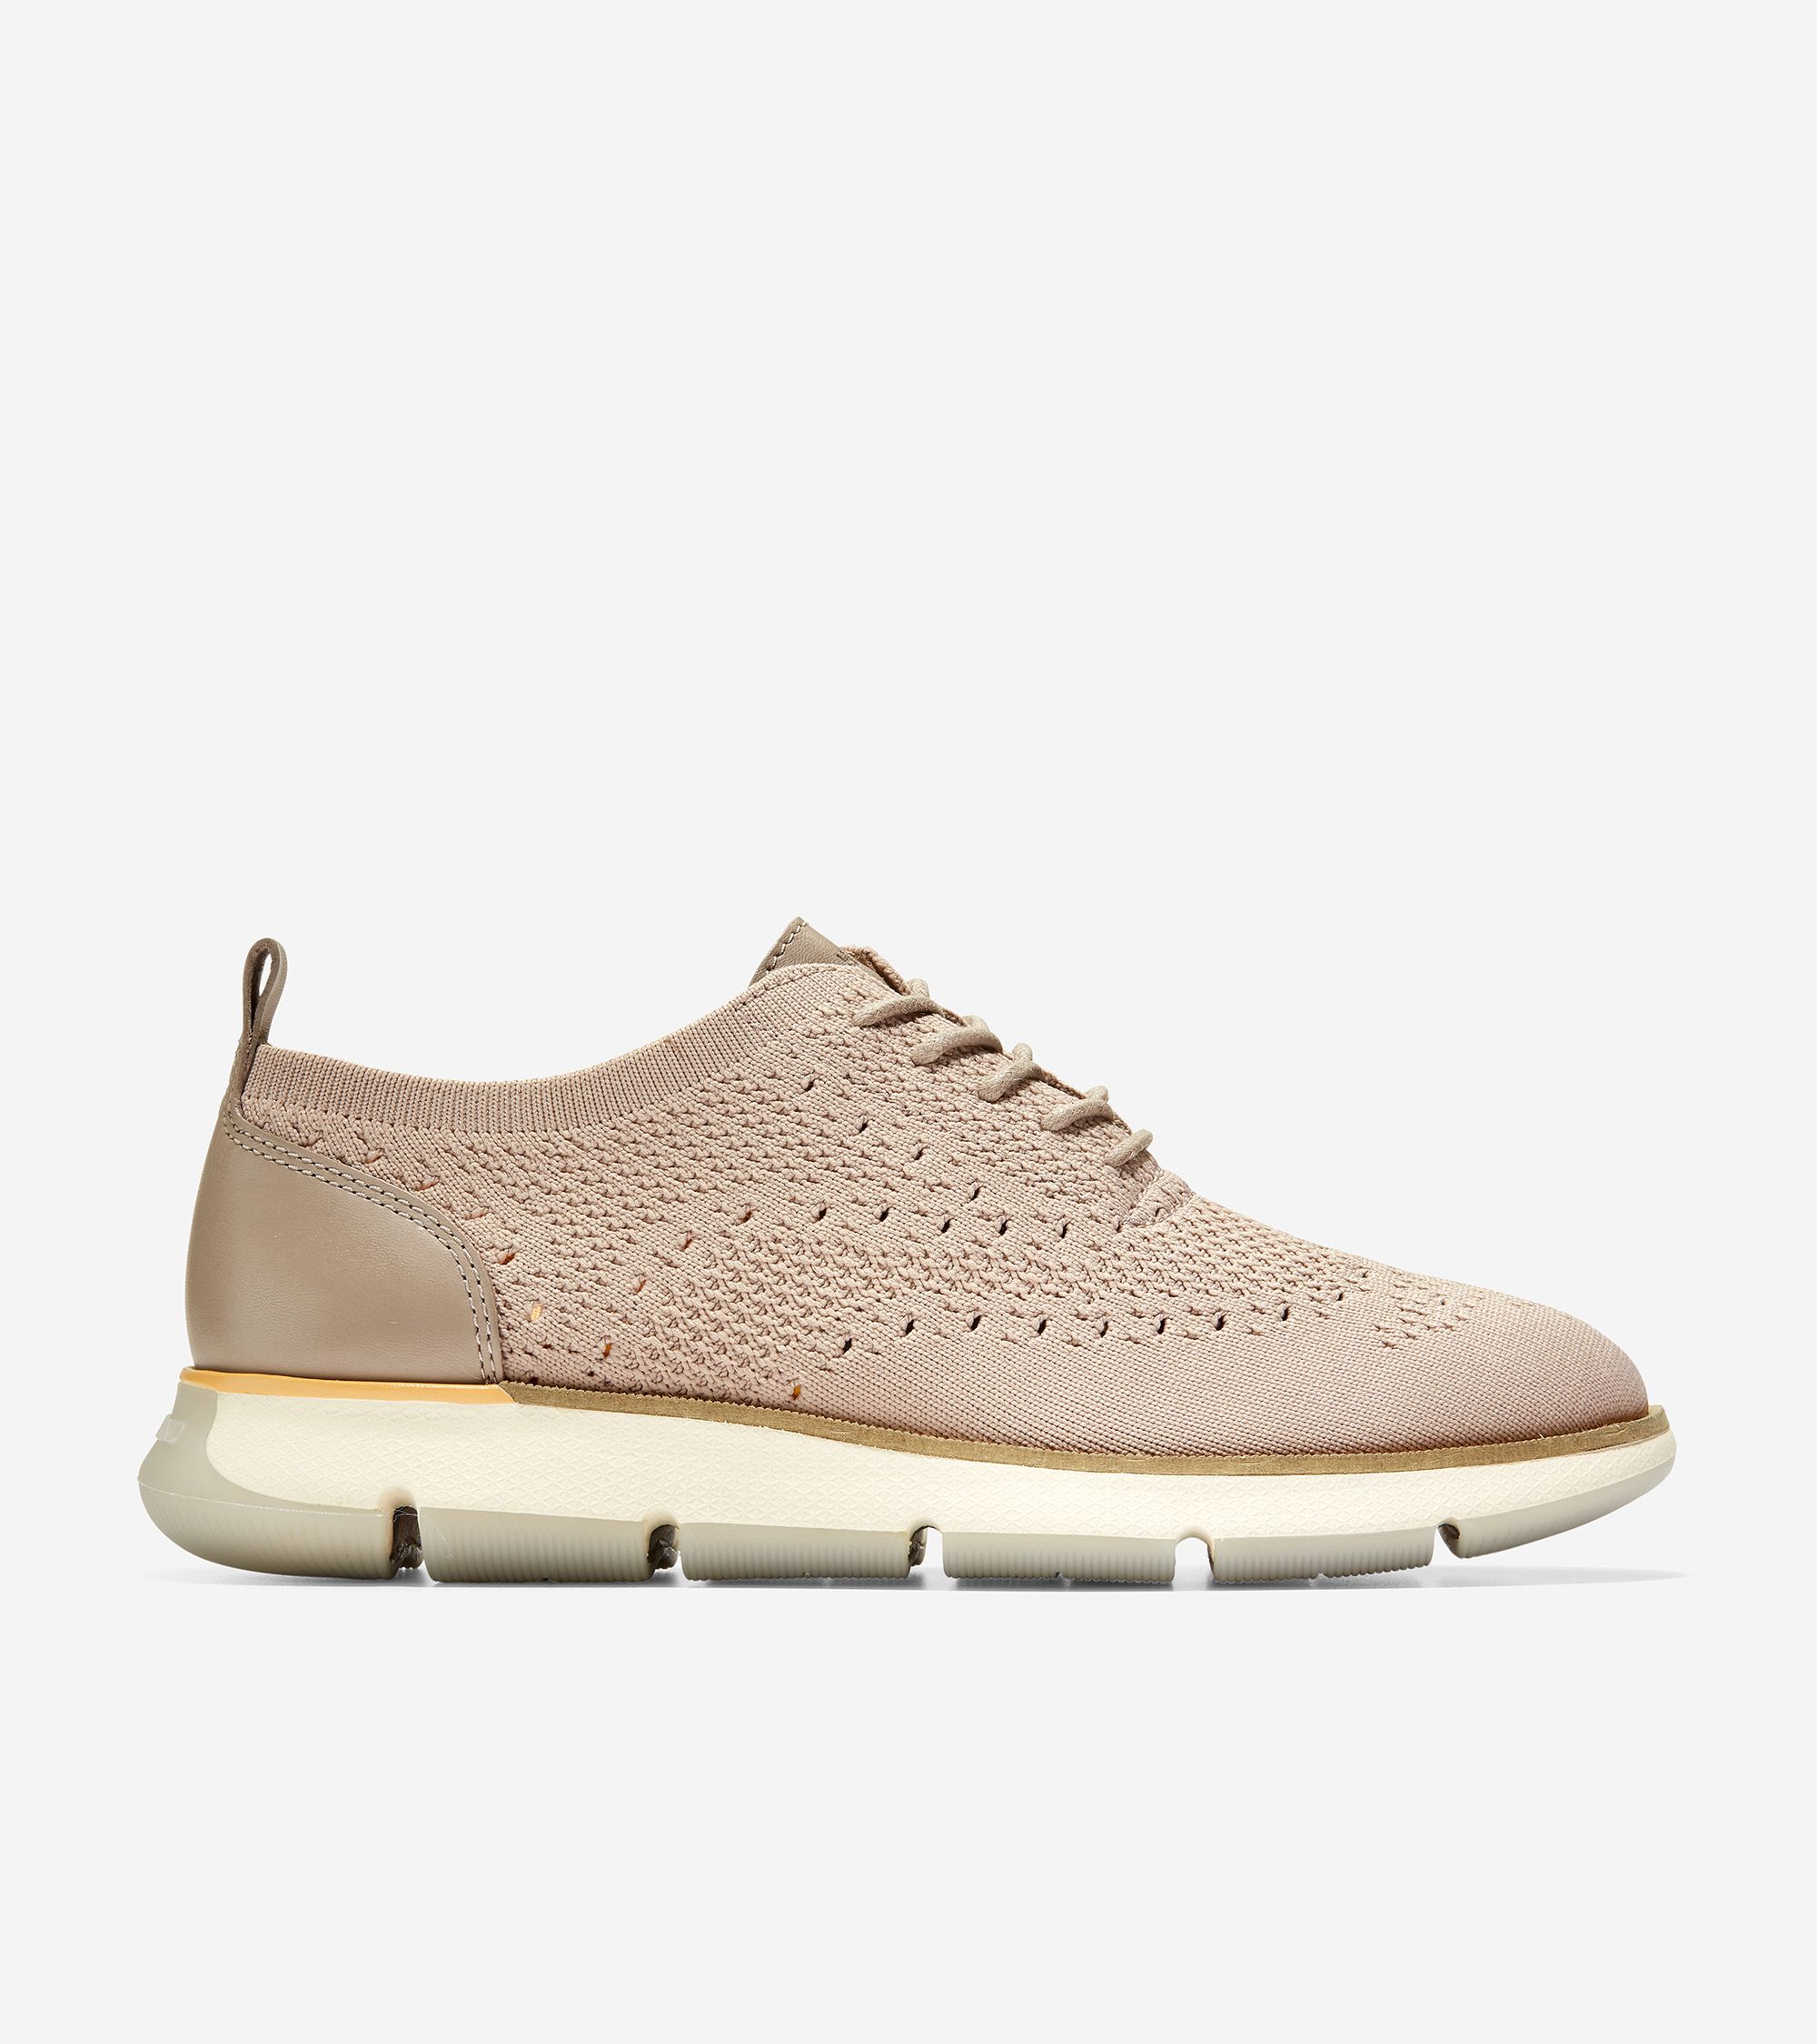 Women's 4.ZERØGRAND Oxford in Etherea Stitchlite™ | Cole Haan | Cole Haan (US)